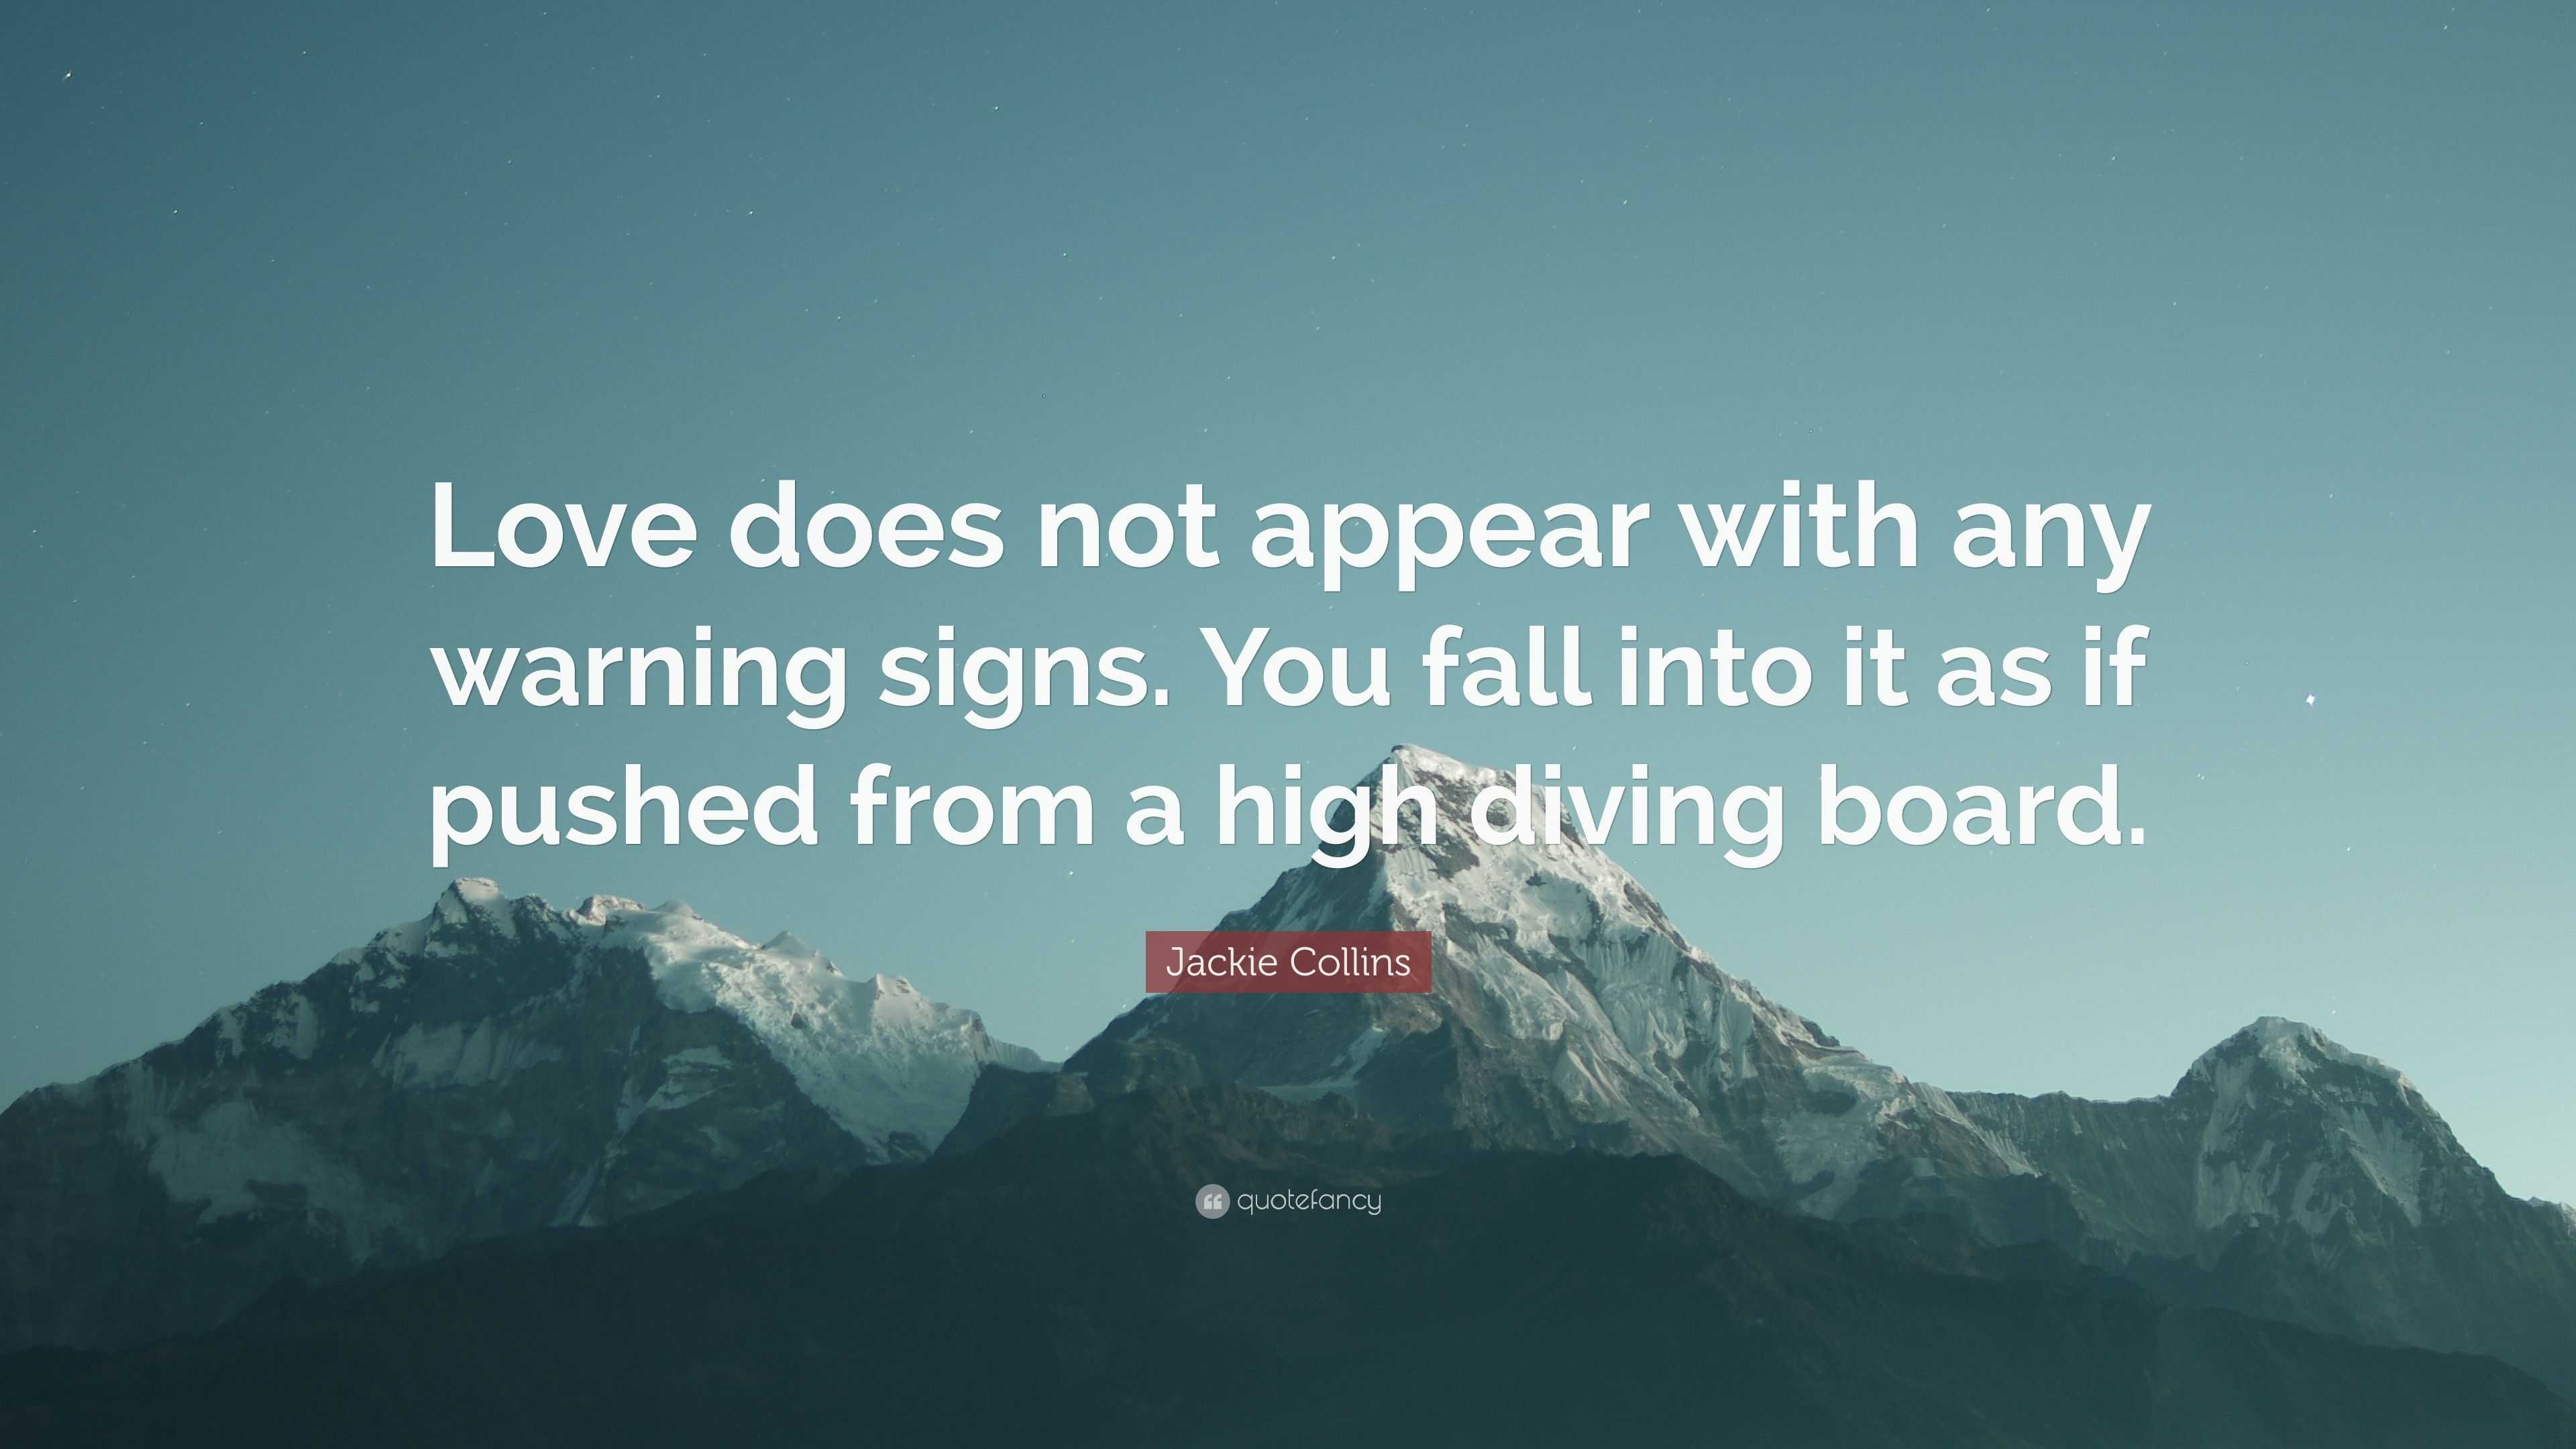 Jackie Collins Quote Love Does Not Appear With Any Warning Signs You Fall Into It As